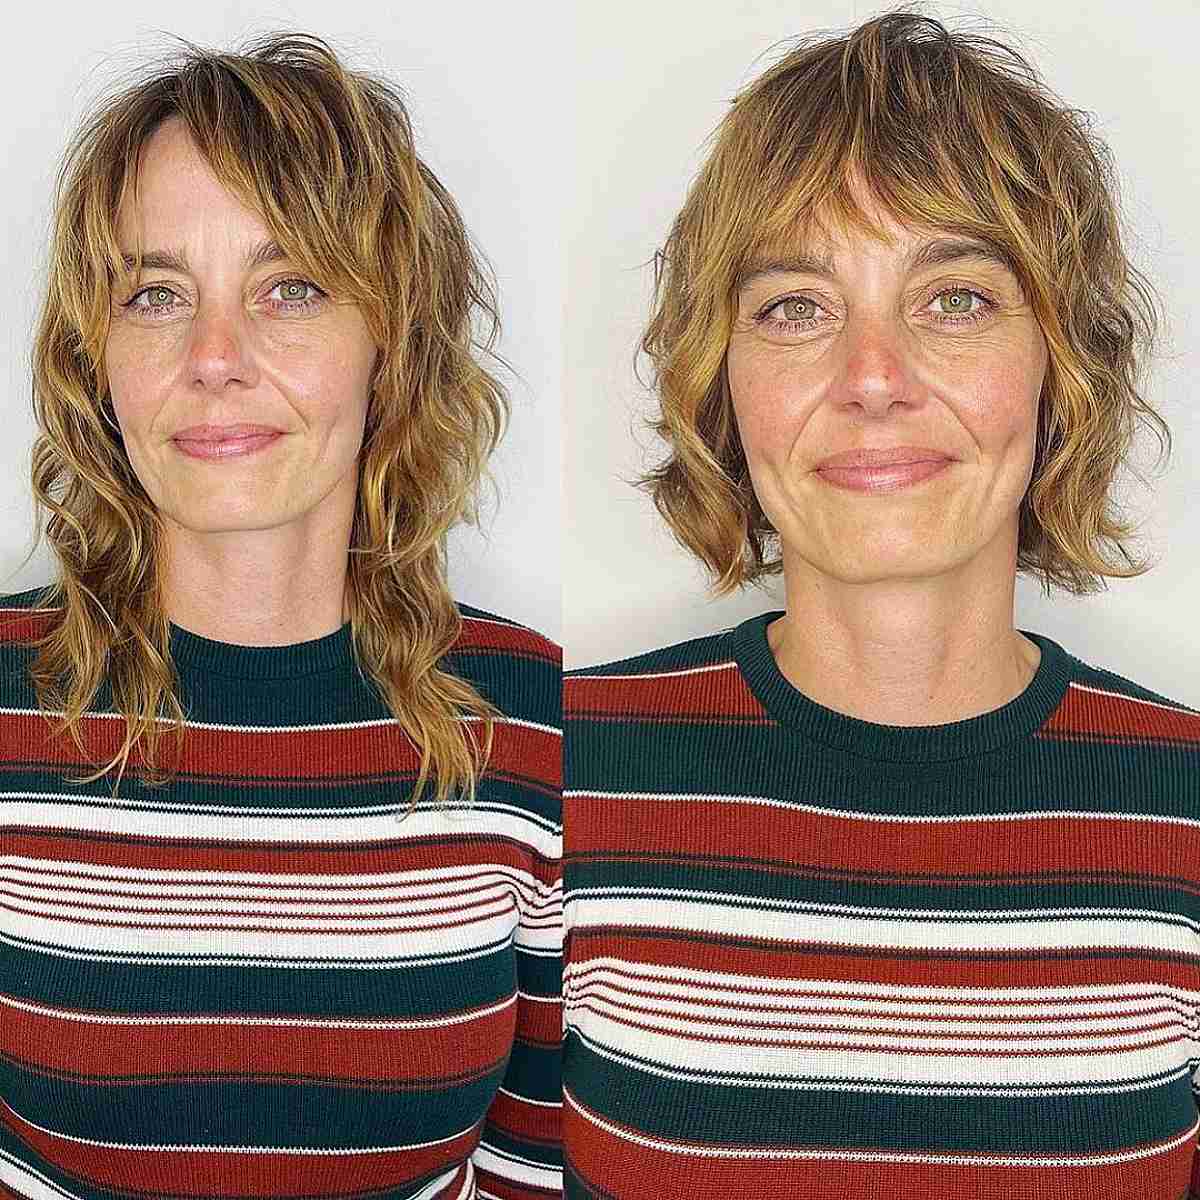 Chin-Length Messy Beach Waves with Bangs for Square Face Shapes